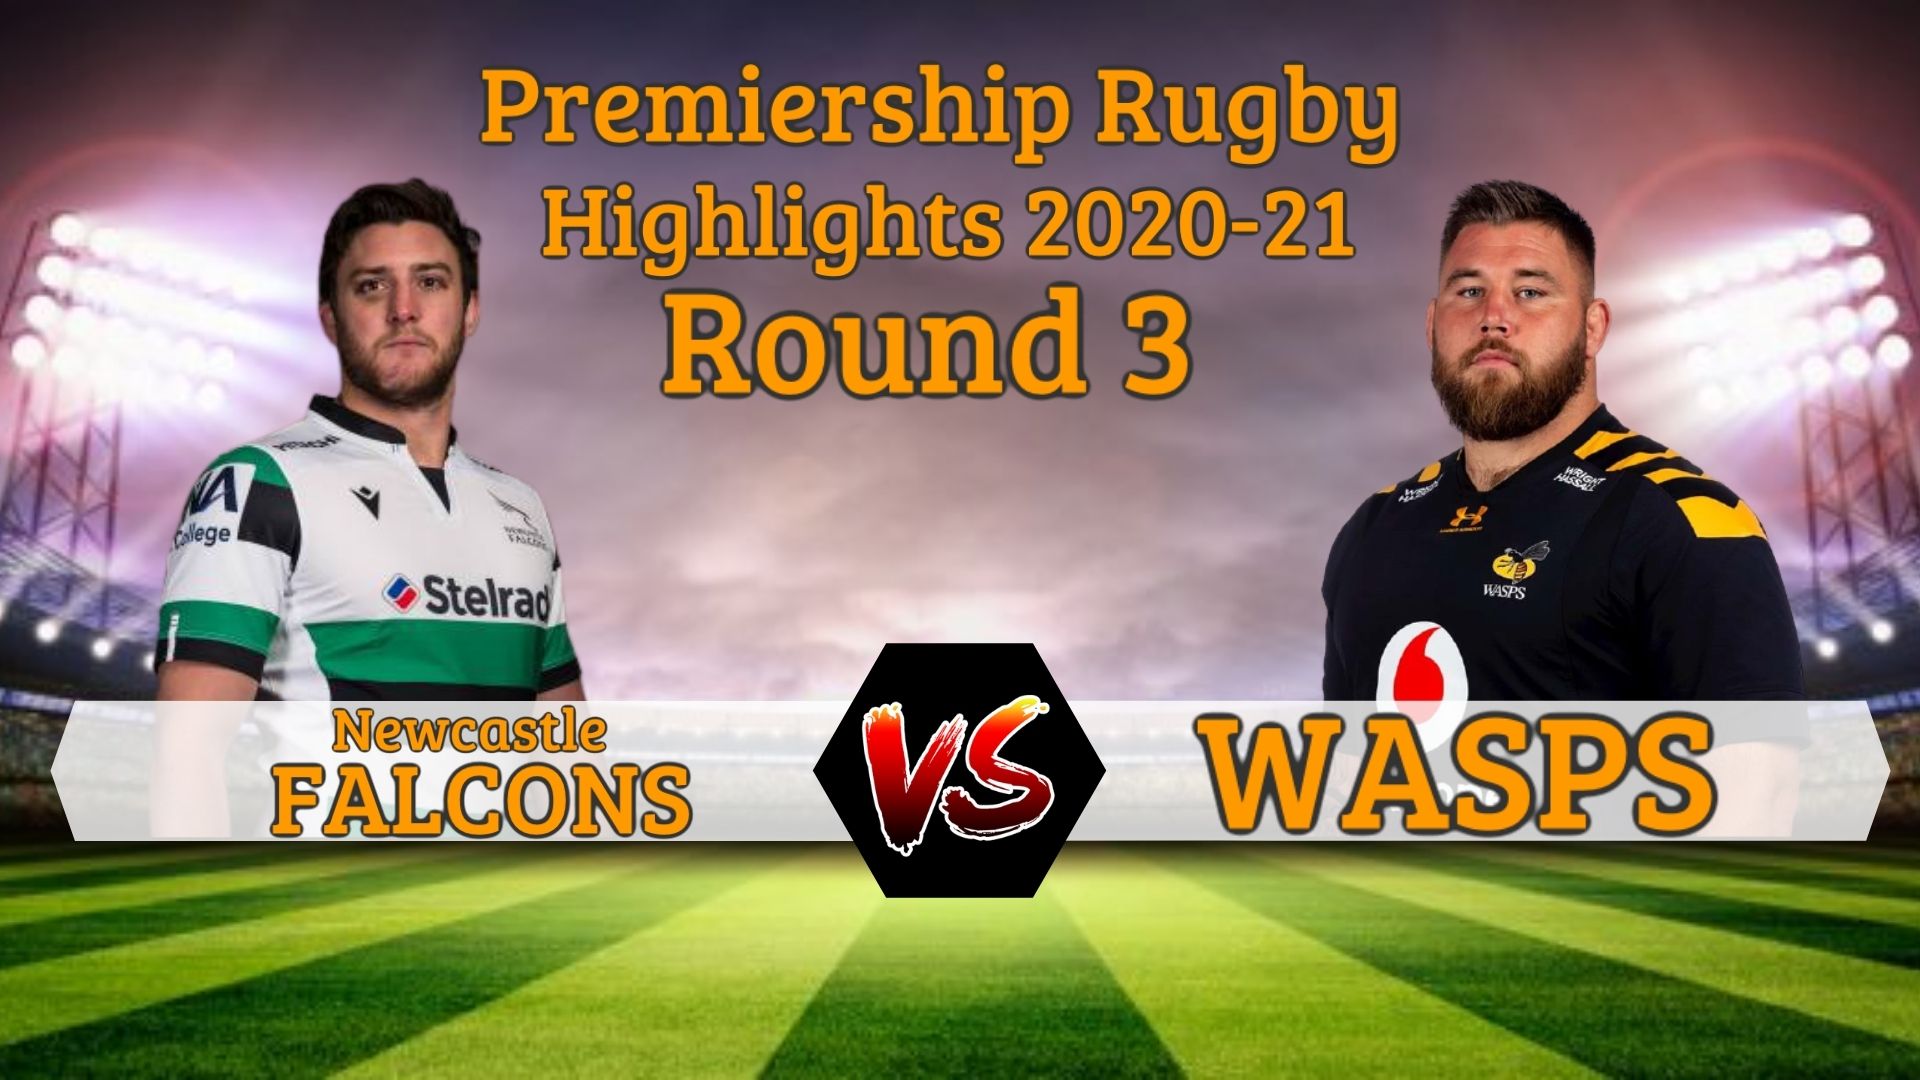 Wasps Vs Newcastle Falcons Premiership Rugby 2020 RD 3